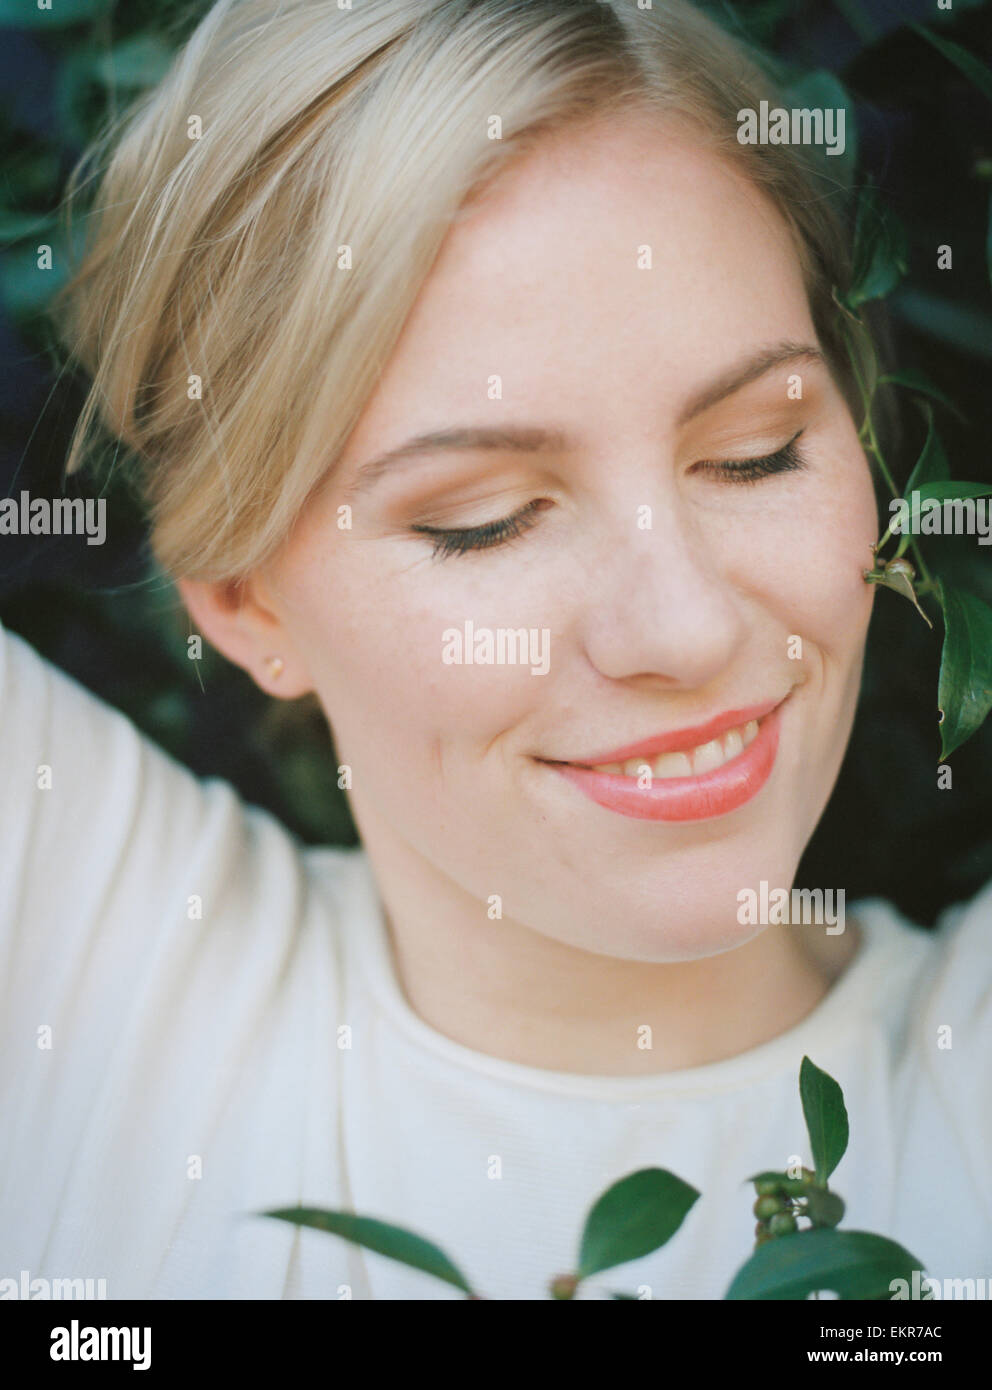 A pretty woman smiling with her eyes closed. Stock Photo